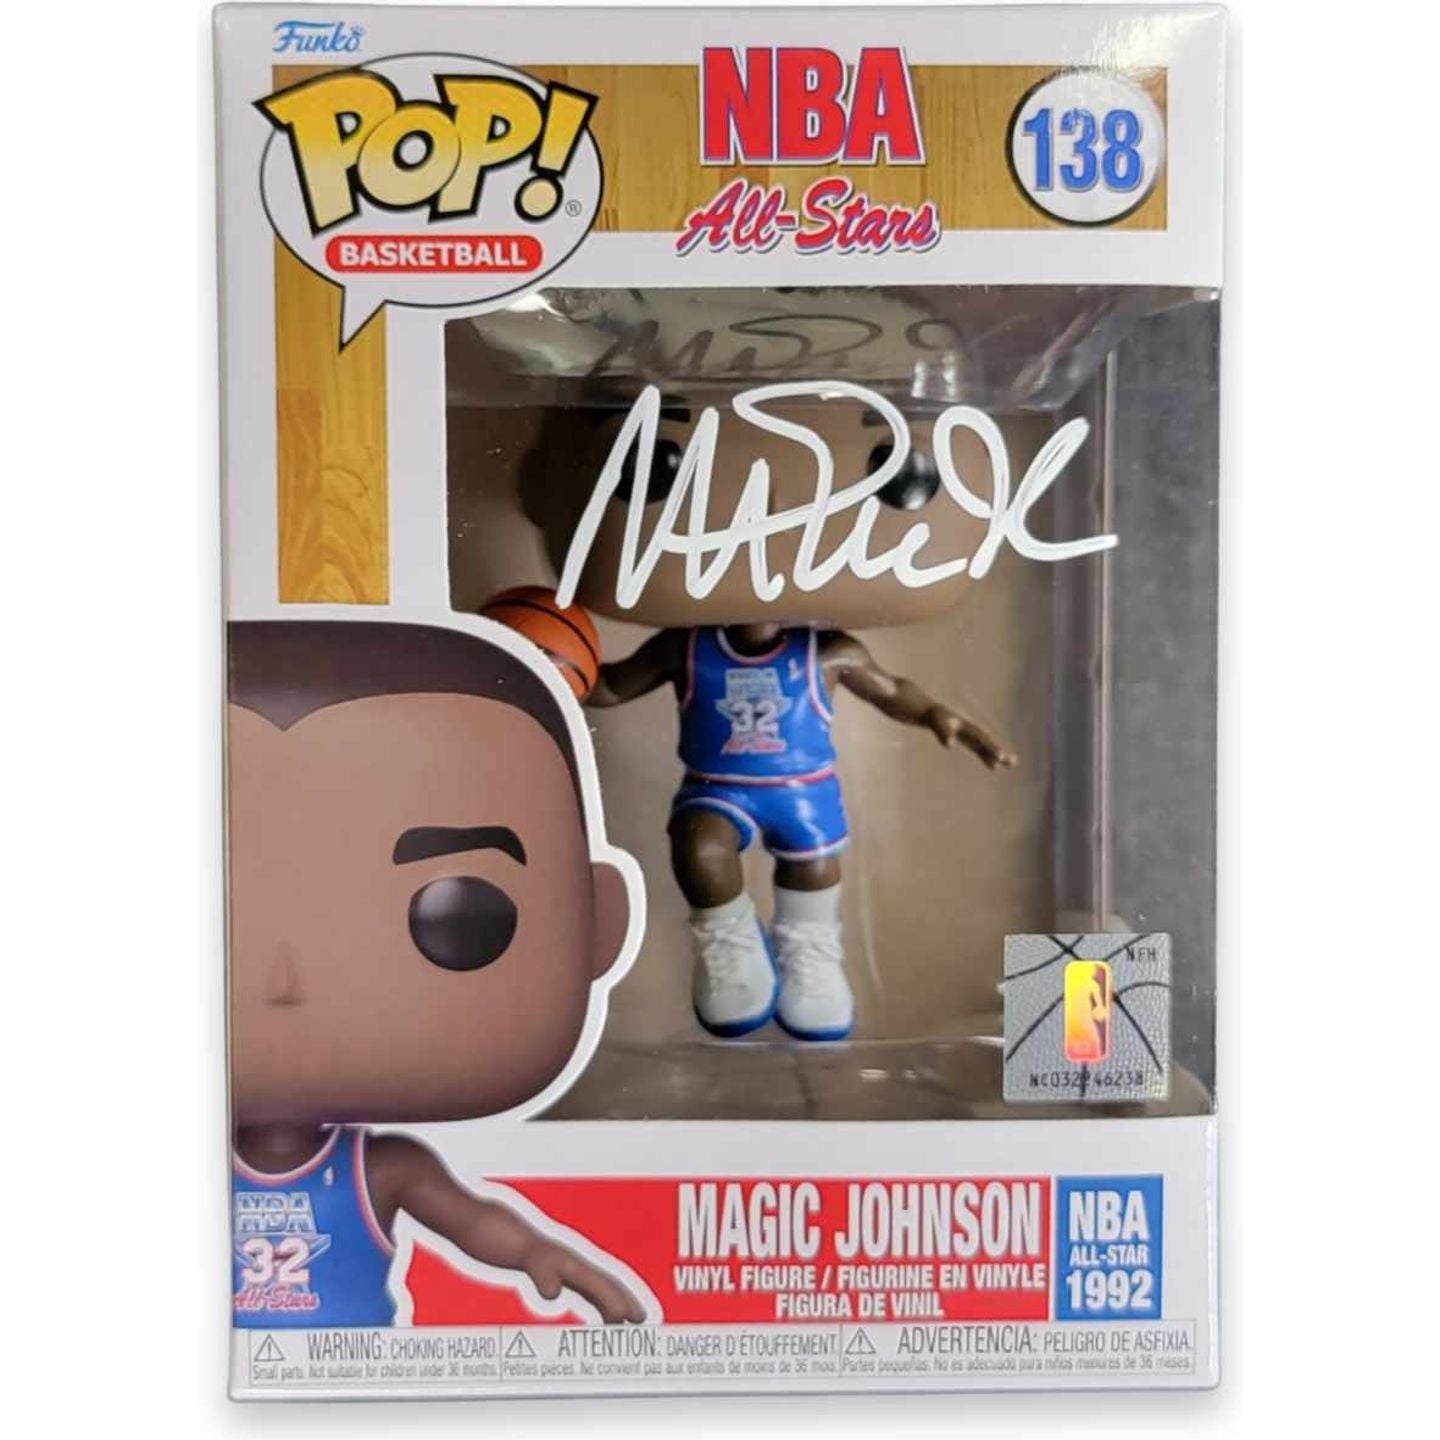 MAGIC JOHNSON SIGNED NBA ALL-STARS FUNKO POP! #138 AUTOGRAPH IS JSA AUTHENTICATED IN STOCK